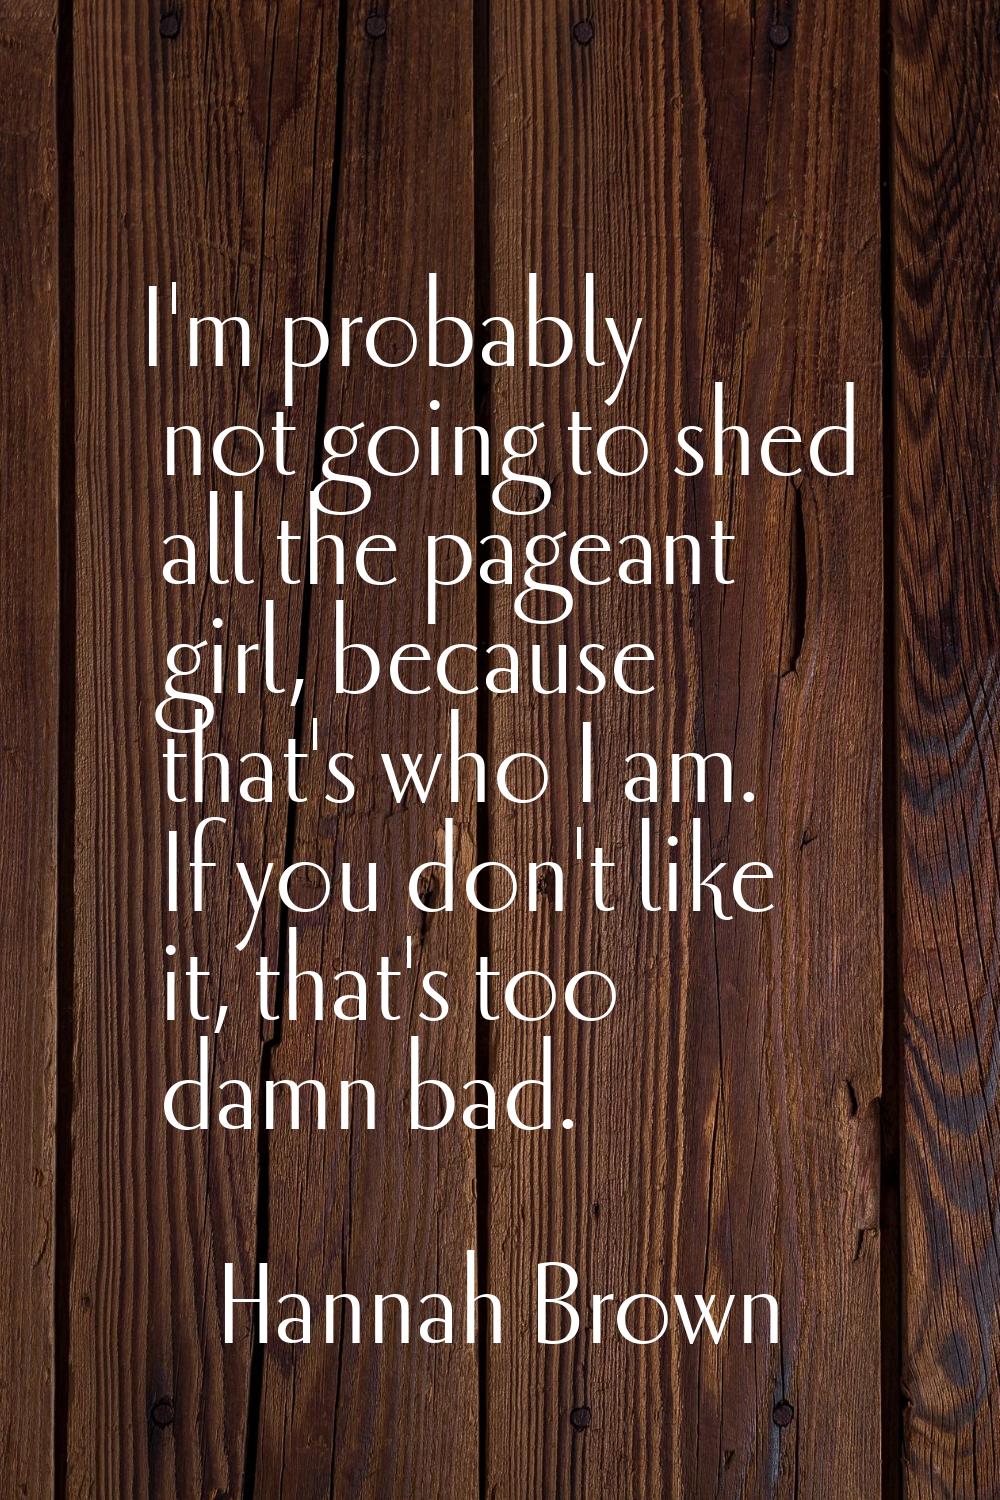 I'm probably not going to shed all the pageant girl, because that's who I am. If you don't like it,